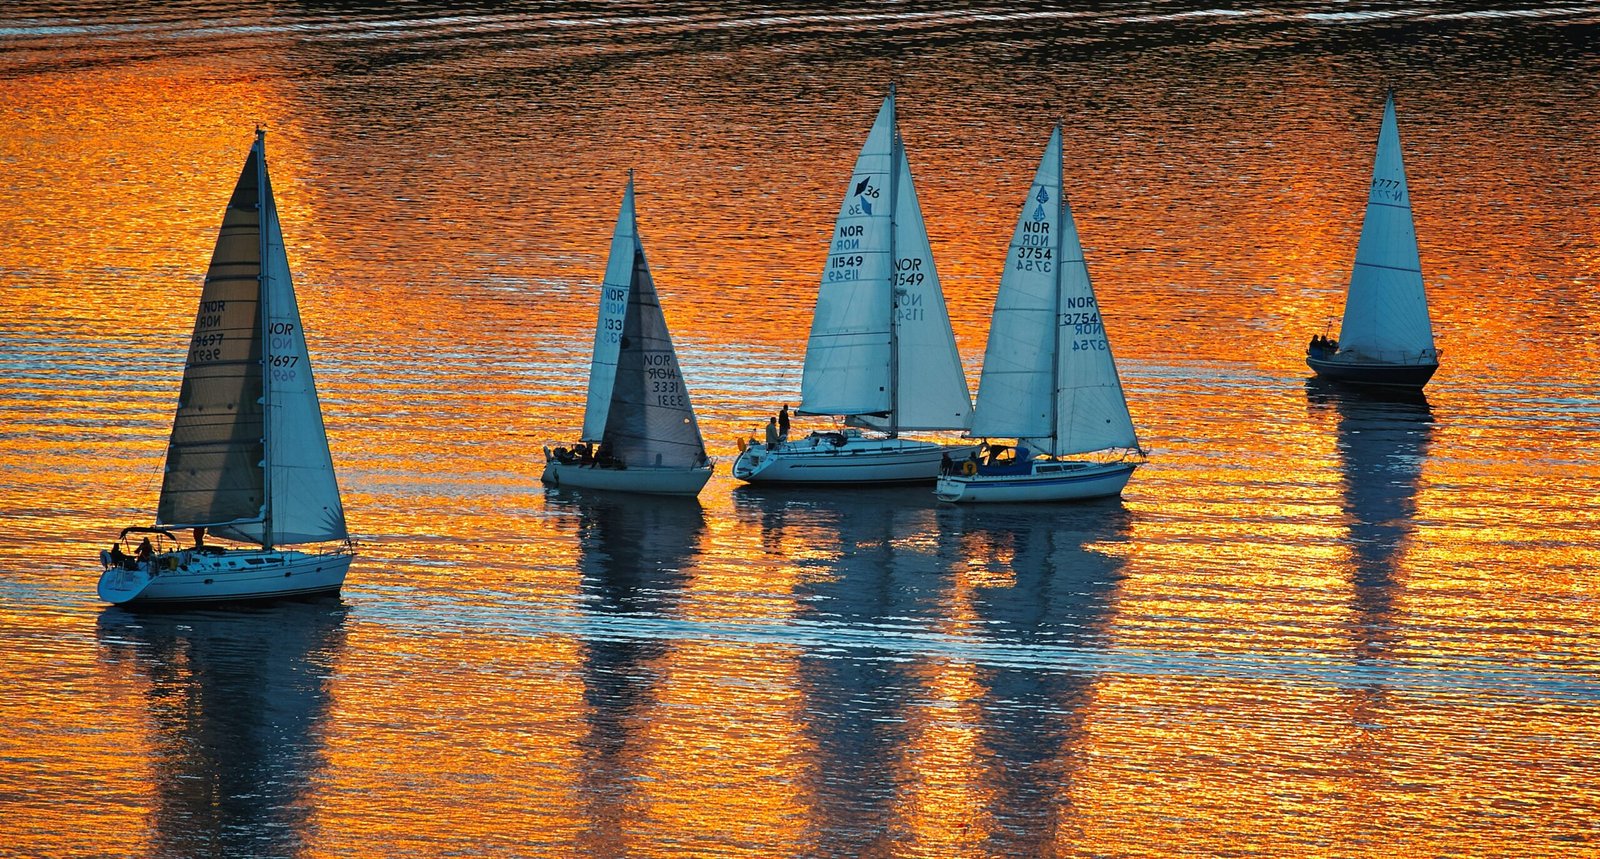 white sail boat on body of water during sunset